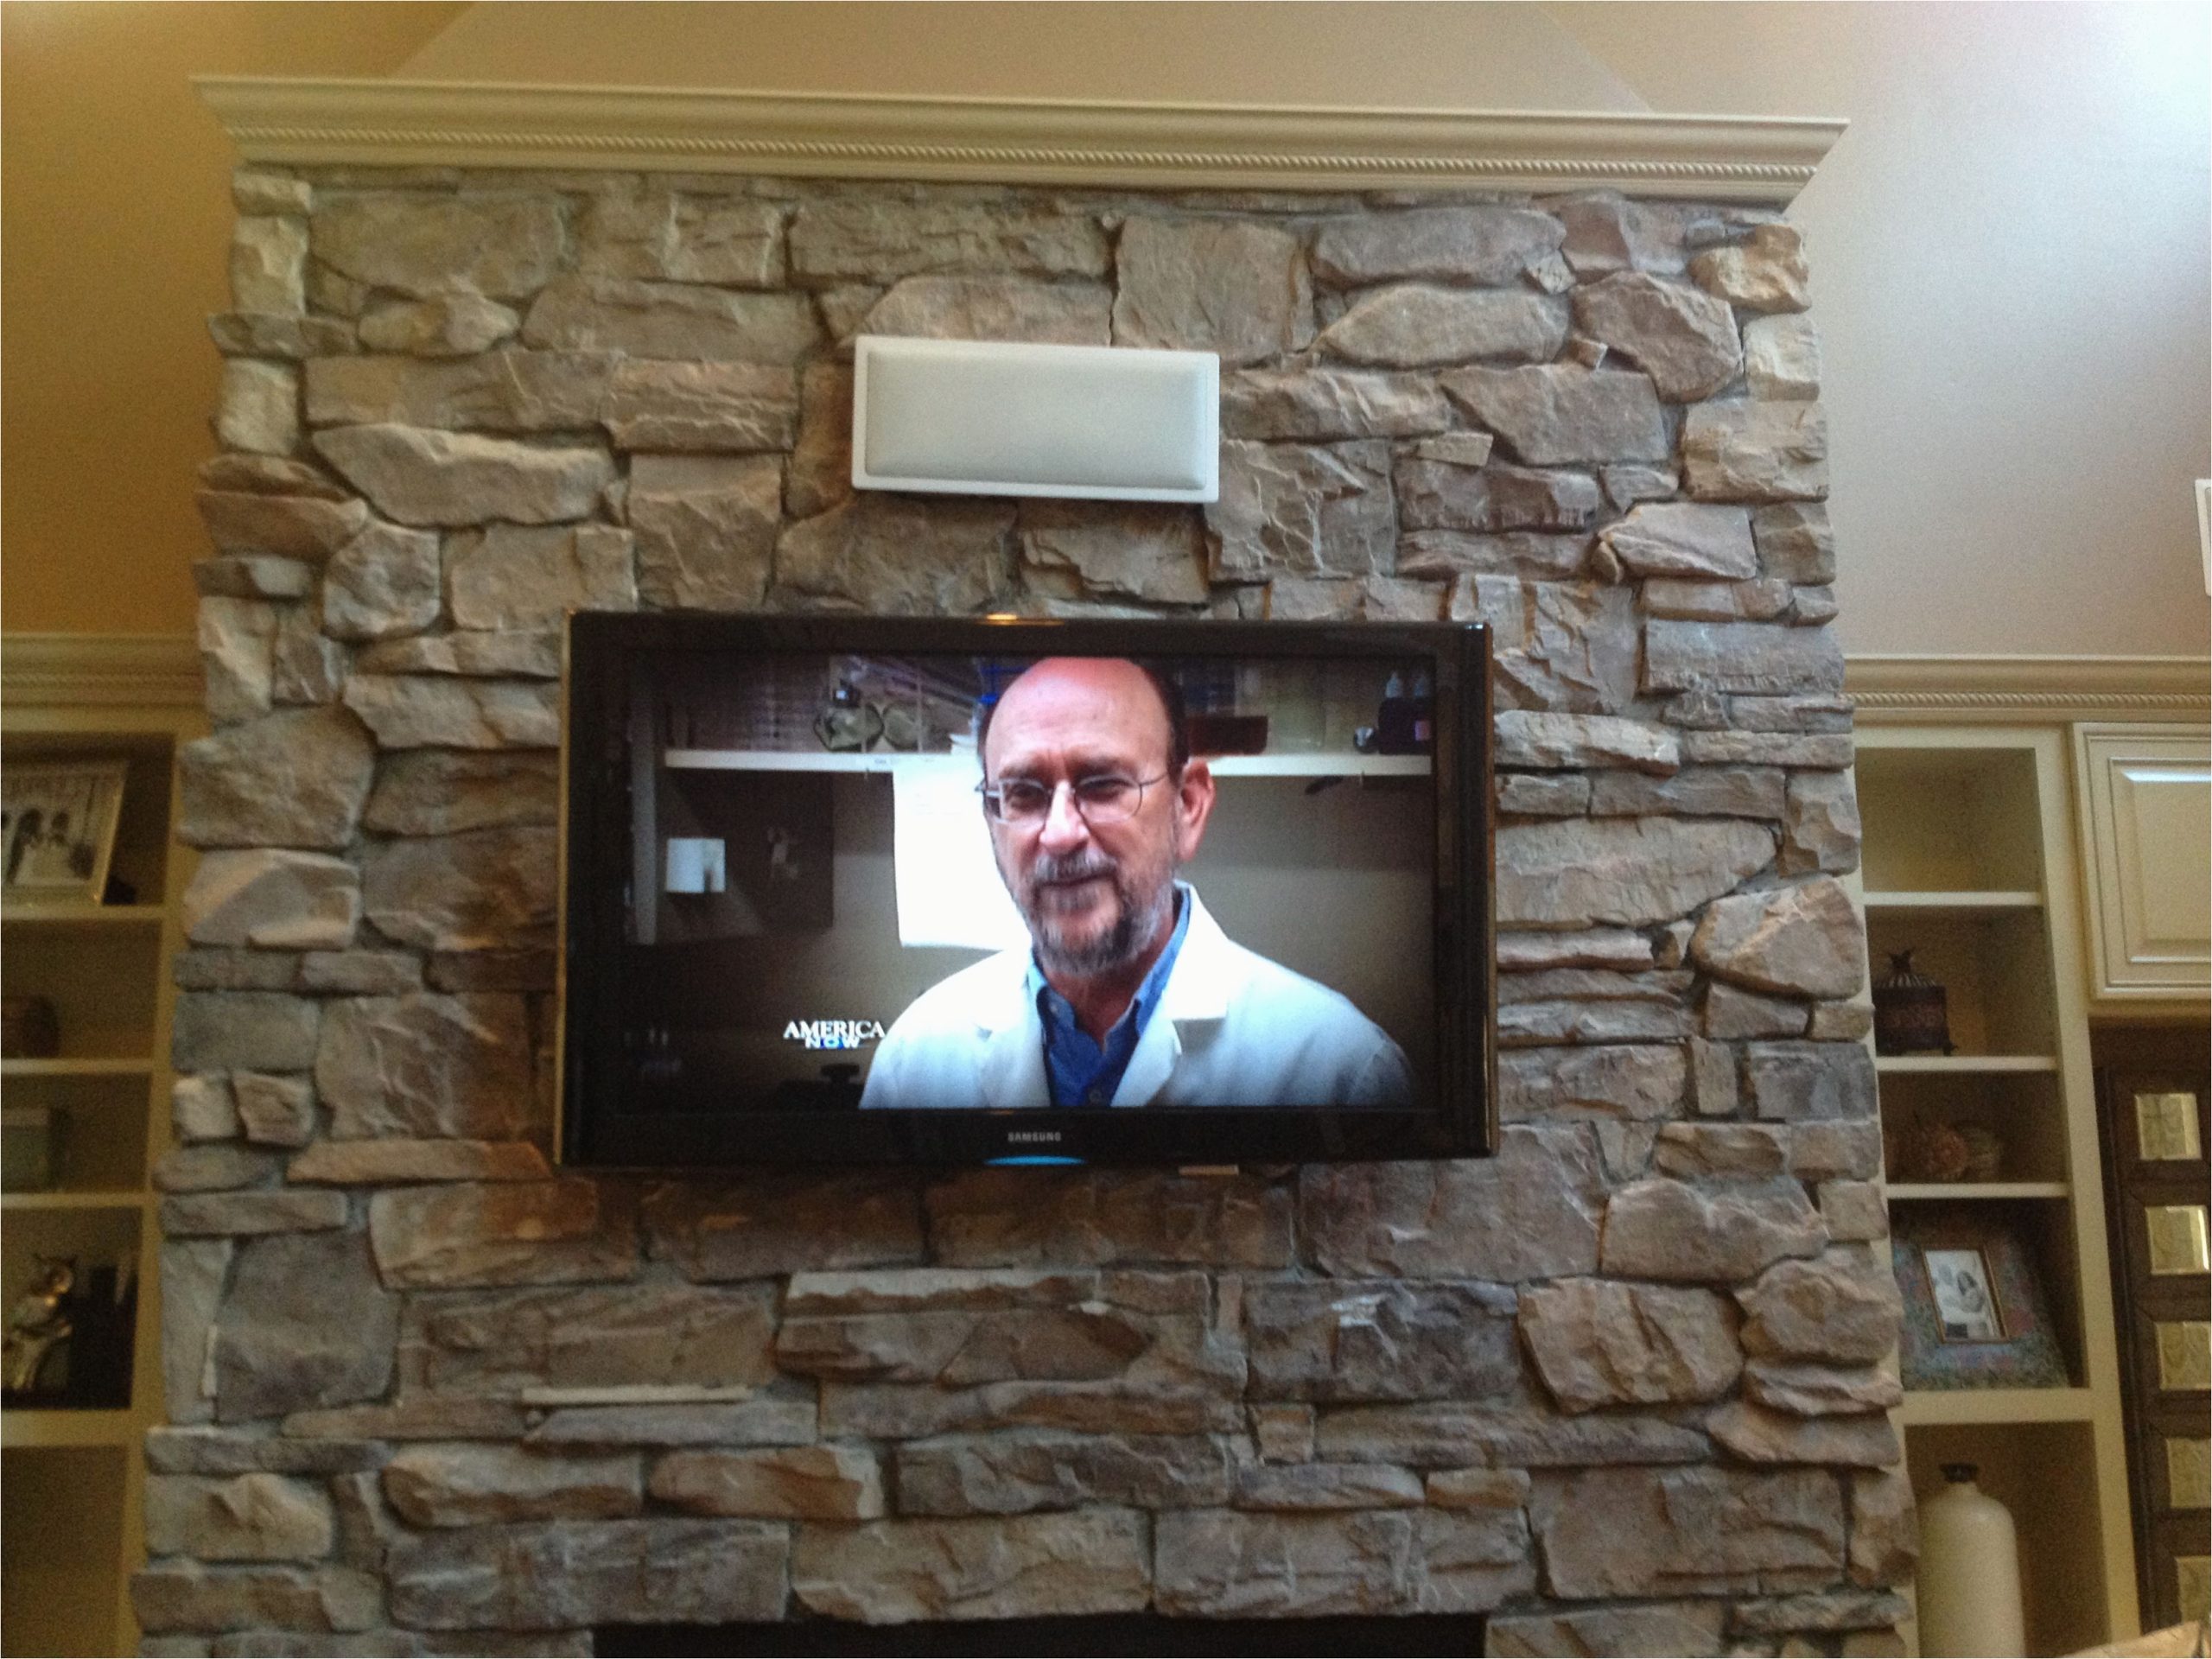 Mounting Tvs Walls Service for Resume Sample Flat Screen Tv Installation Over Stone Fireplace